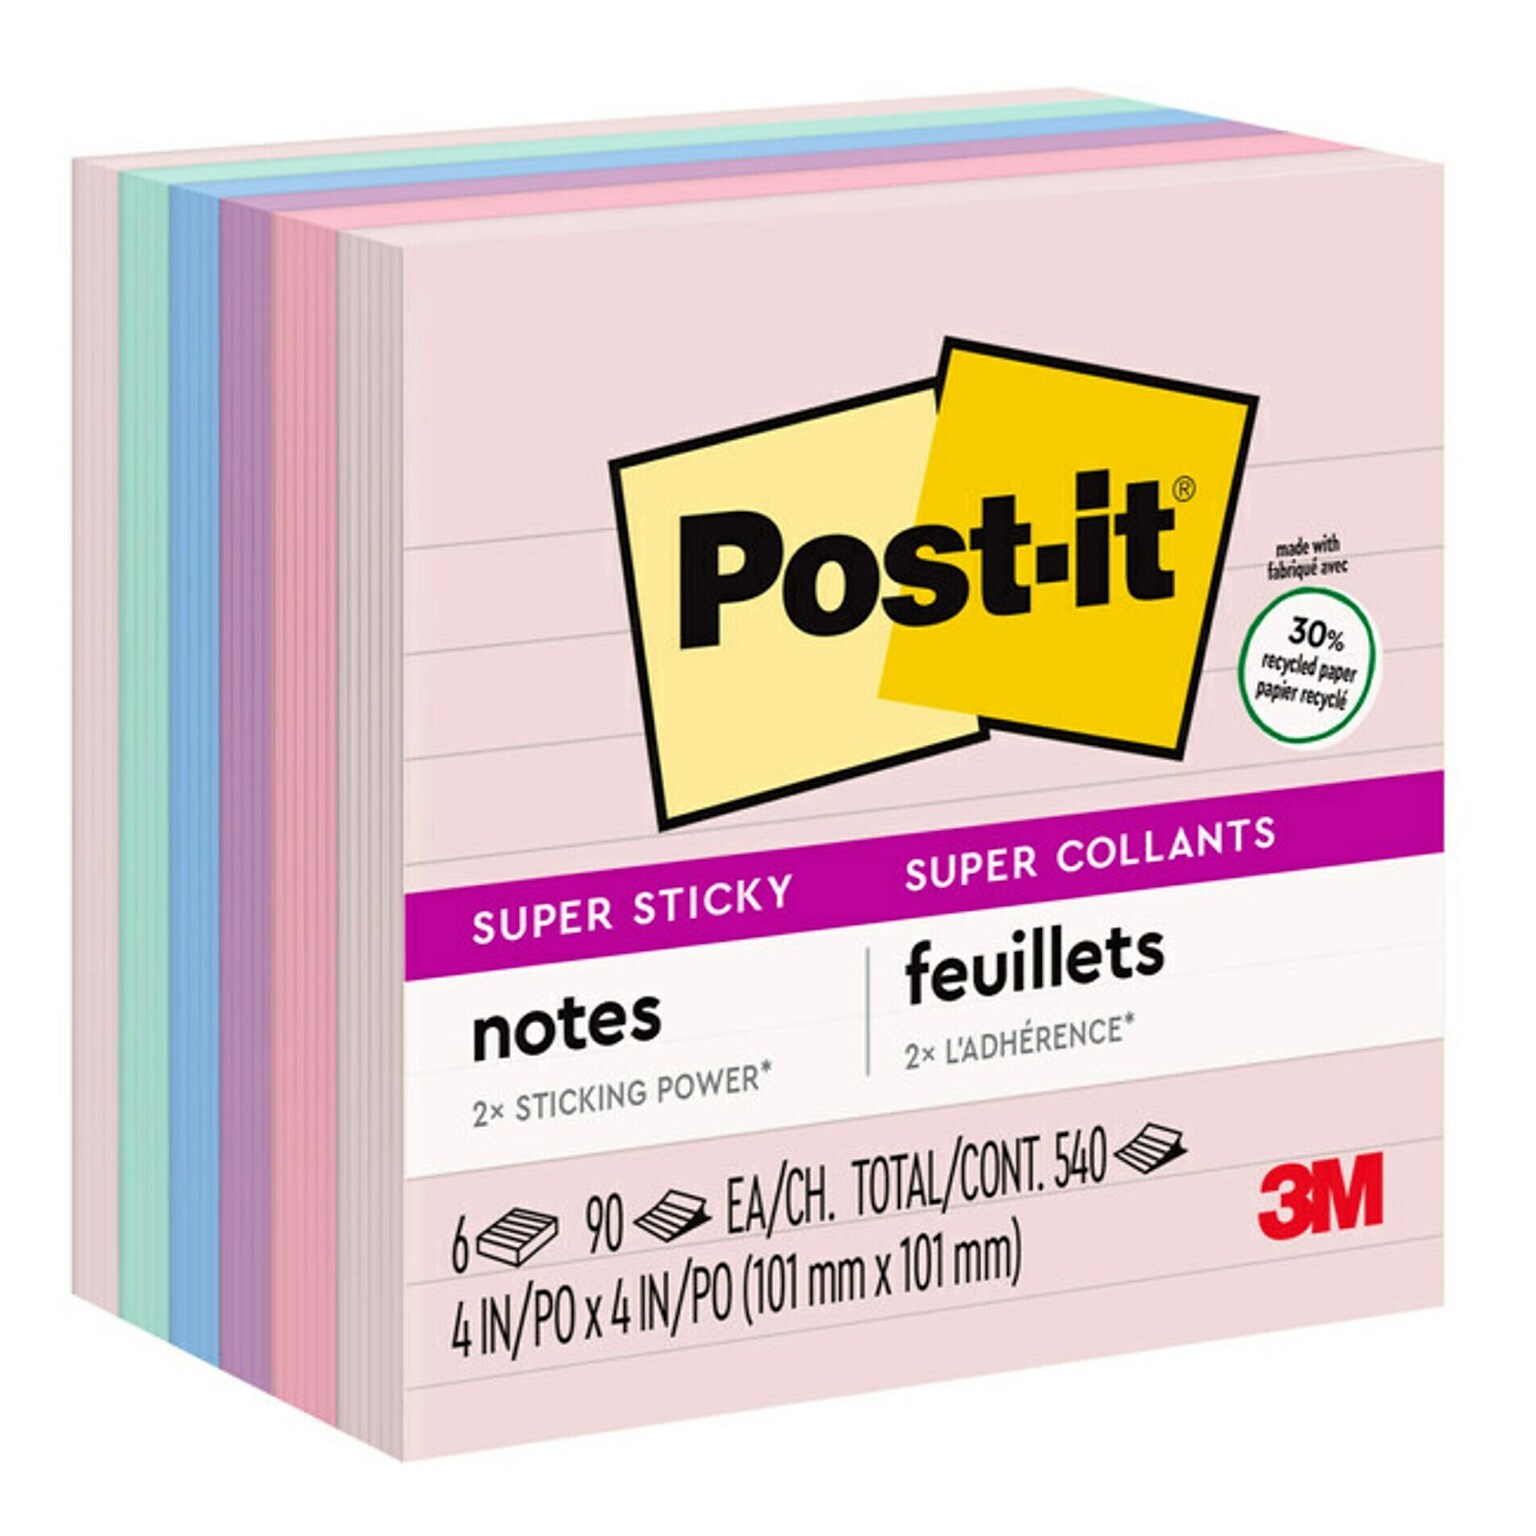 Post-it Recycled Super Sticky Notes, 4 x 4 in., 6 Pads, 90 Sheets/Pad, Lined, 2x the Sticking Power, Wanderlust Pastels